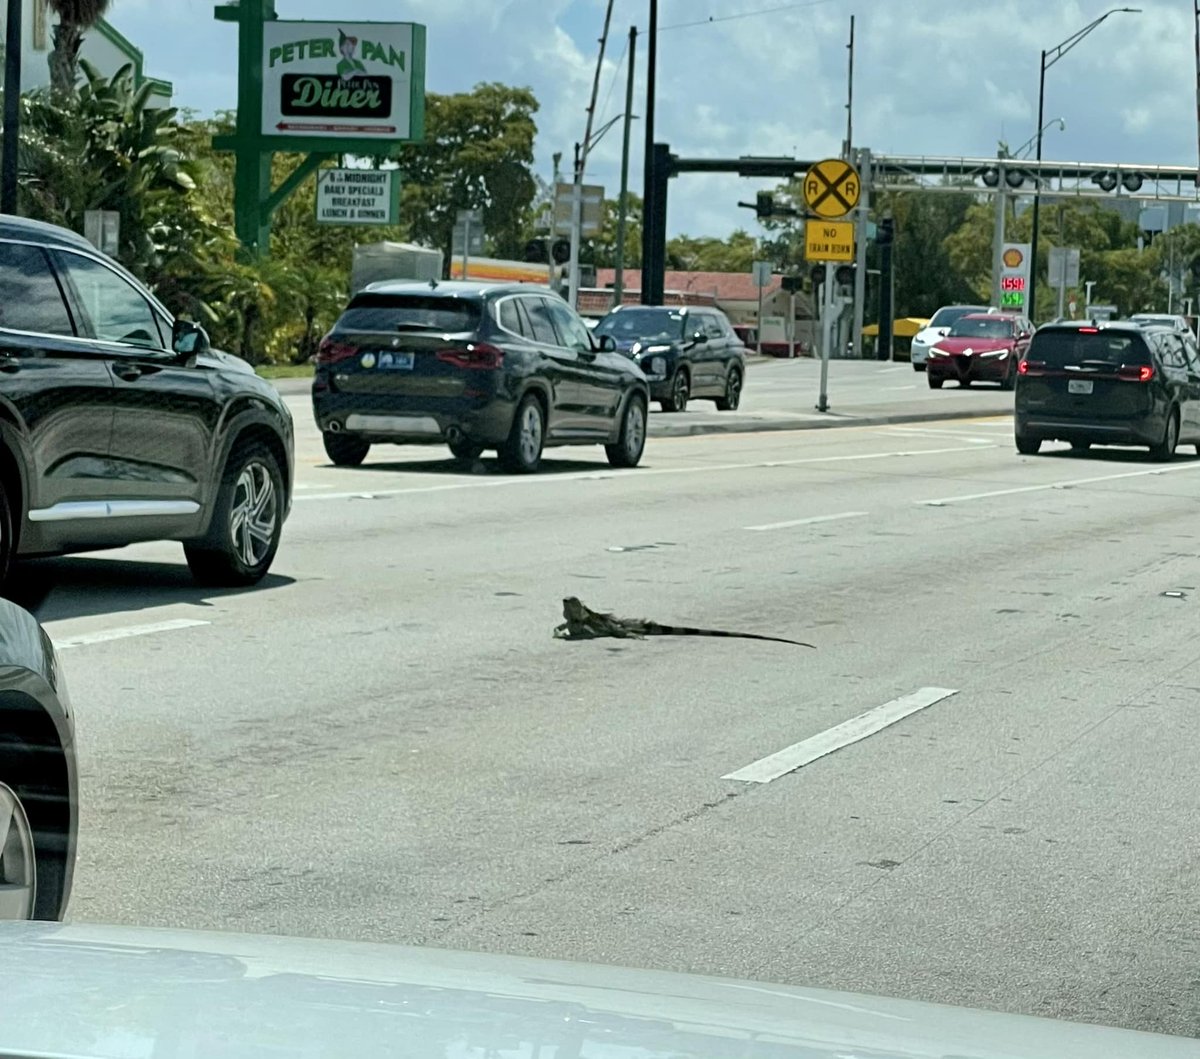 Only in Florida do you see an iguana in traffic
#OnlyinFlorida #onlyindade #floridalife 🦎🇺🇸